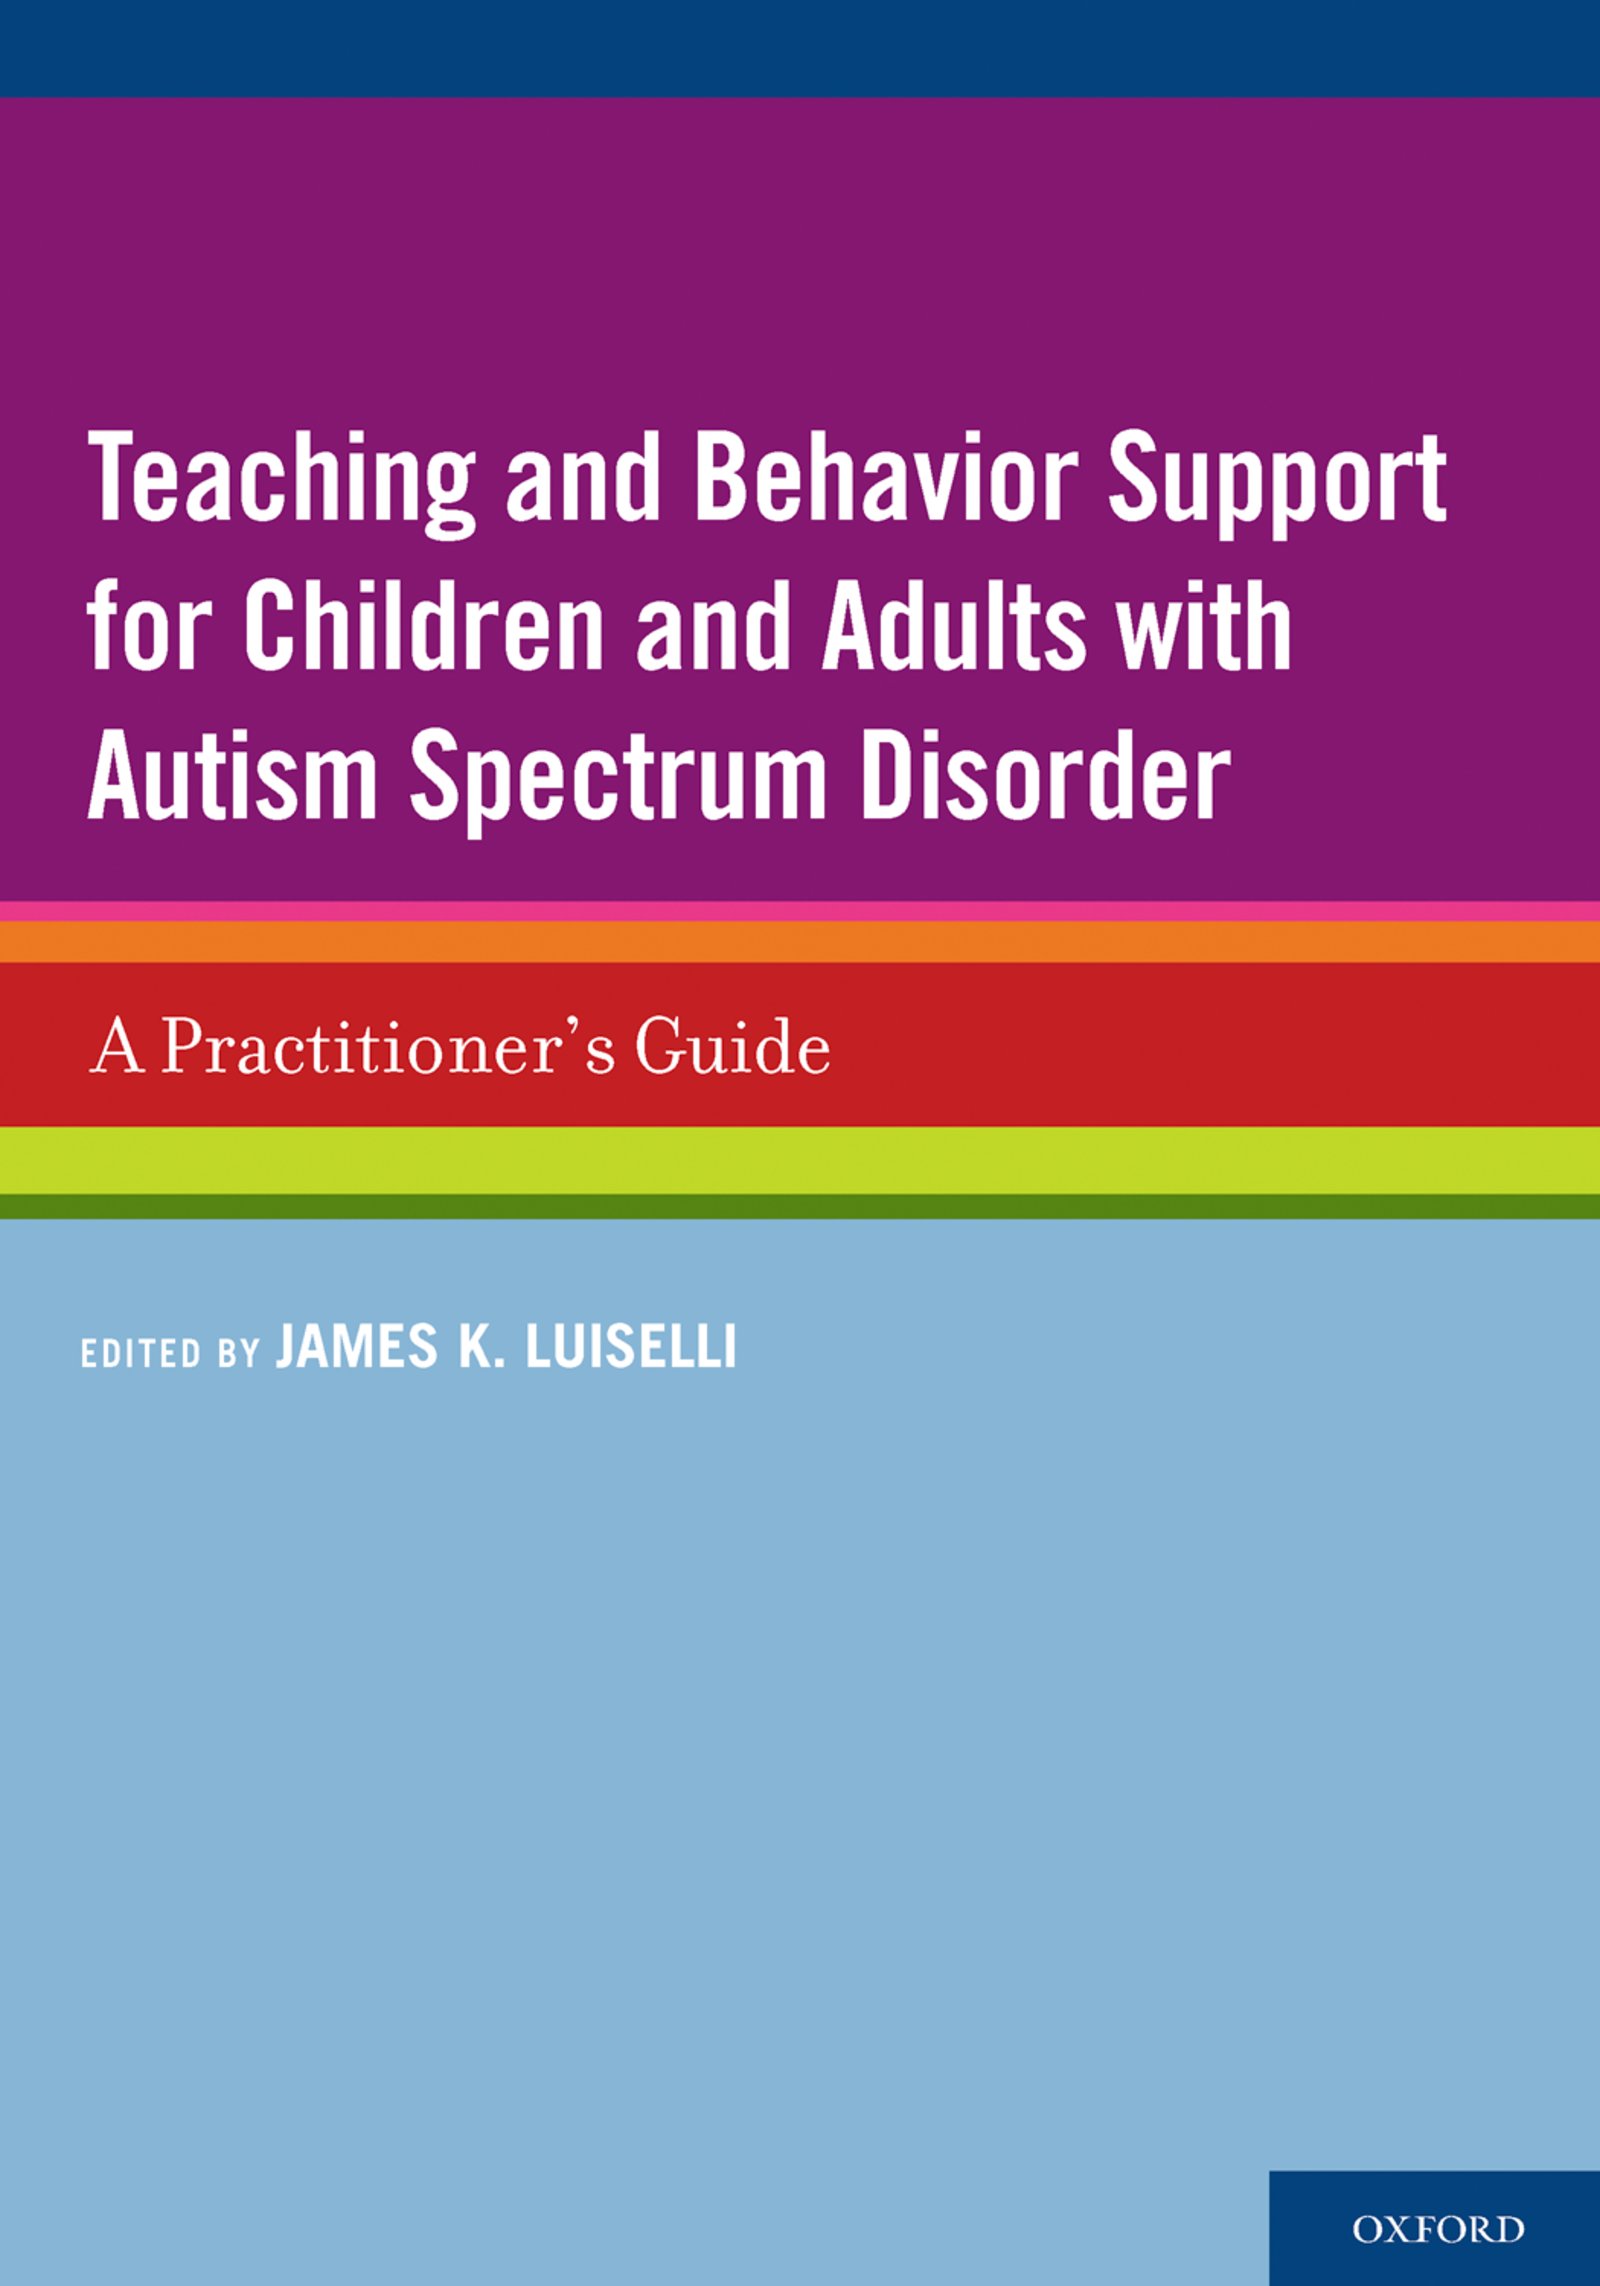 Teaching and Behavior Support for Children and Adults with Autism Spectrum Disorder